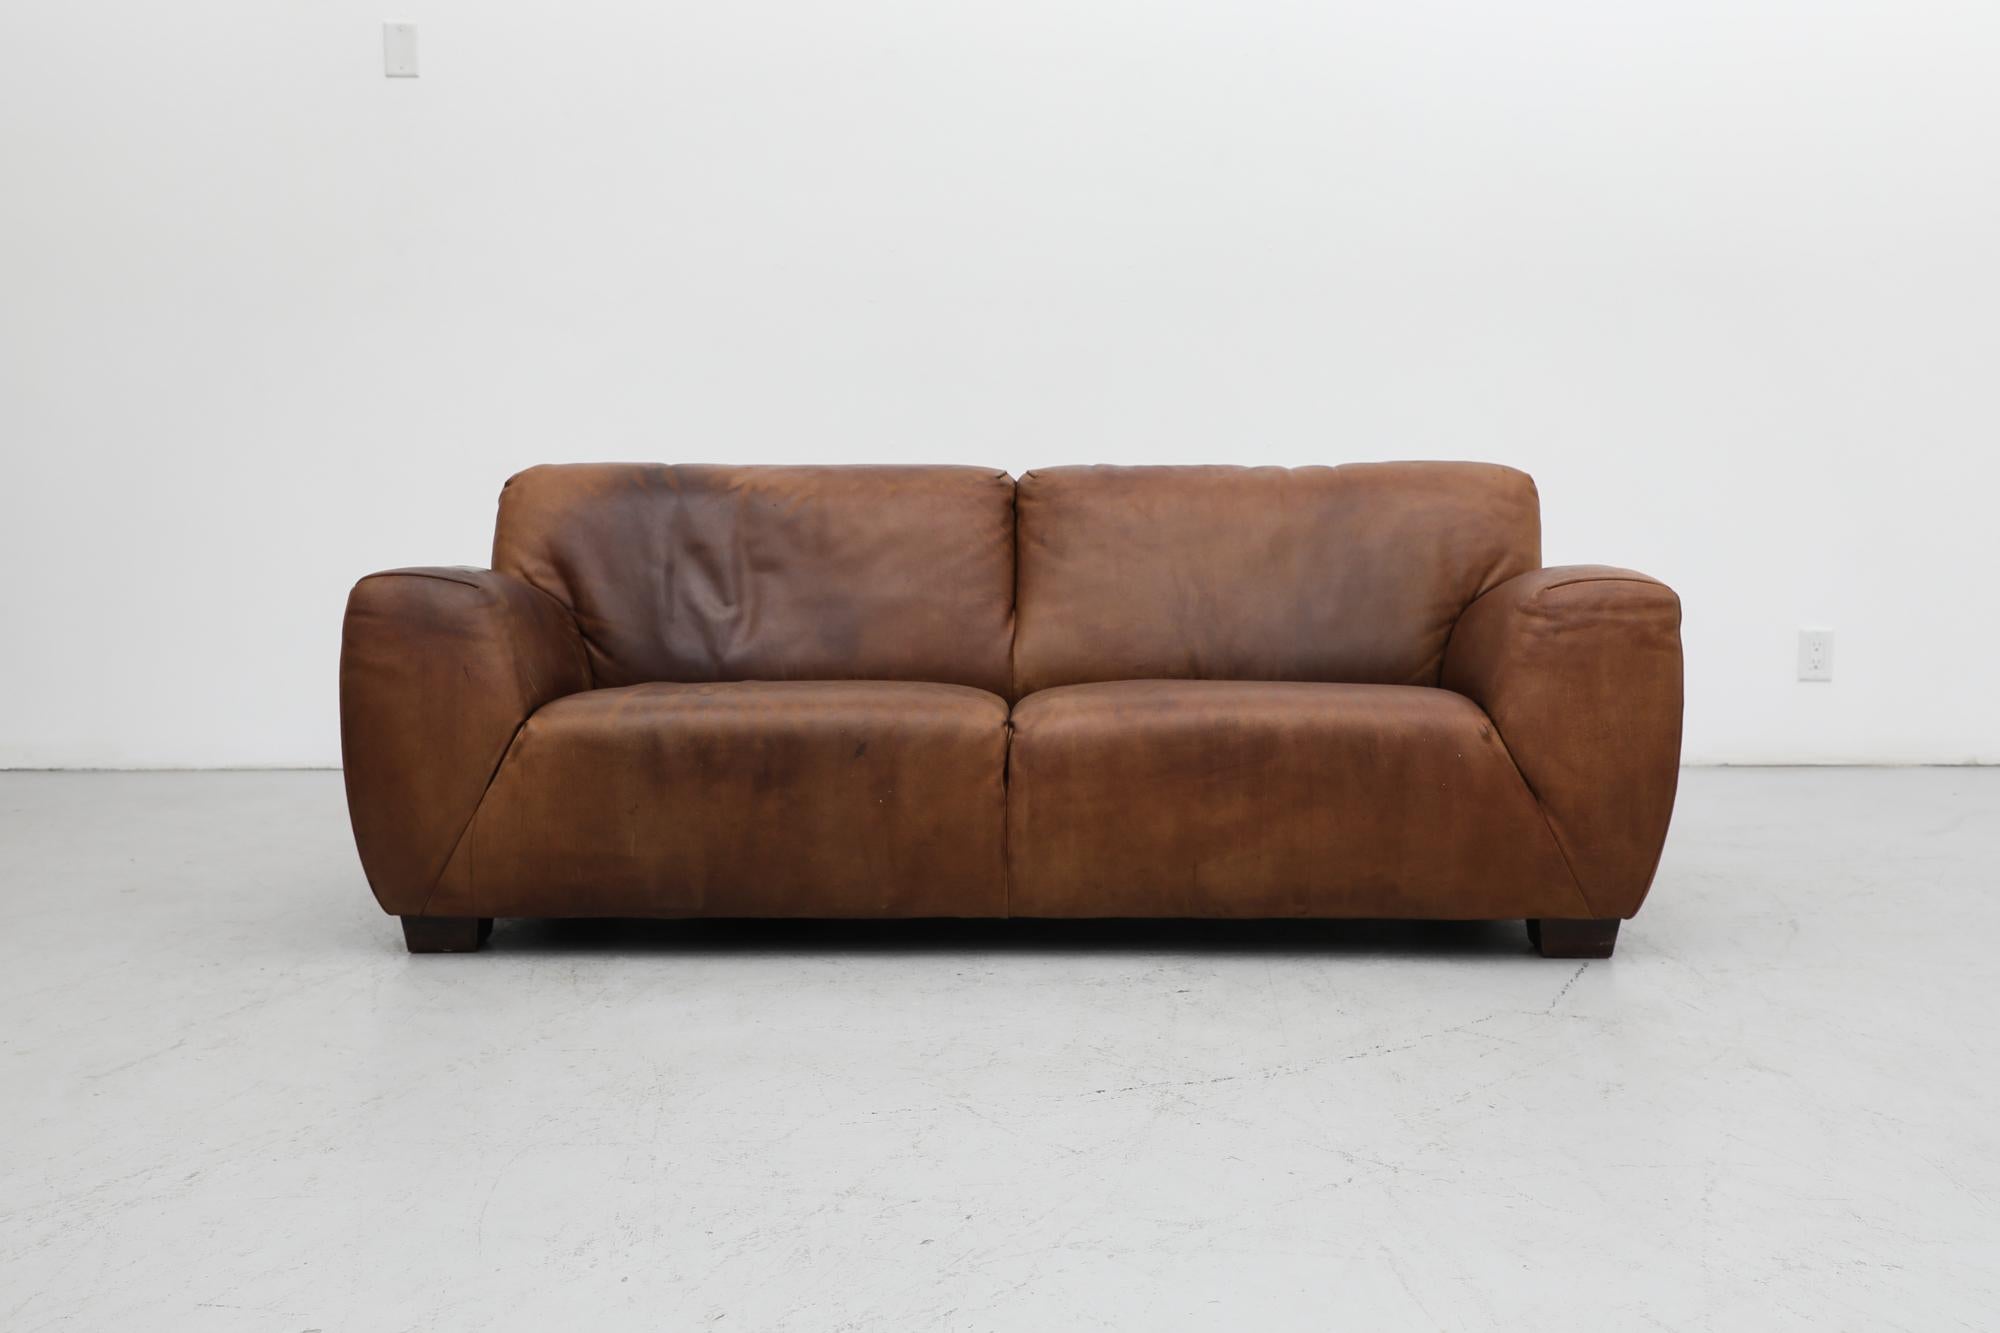 Mid-Century cognac leather sofa by Molinari Design, Italy. This sofa is made with high-end, thick and durable leather and that has sustained a beautiful patina. In original condition with heavy visible signs of wear including scratching and